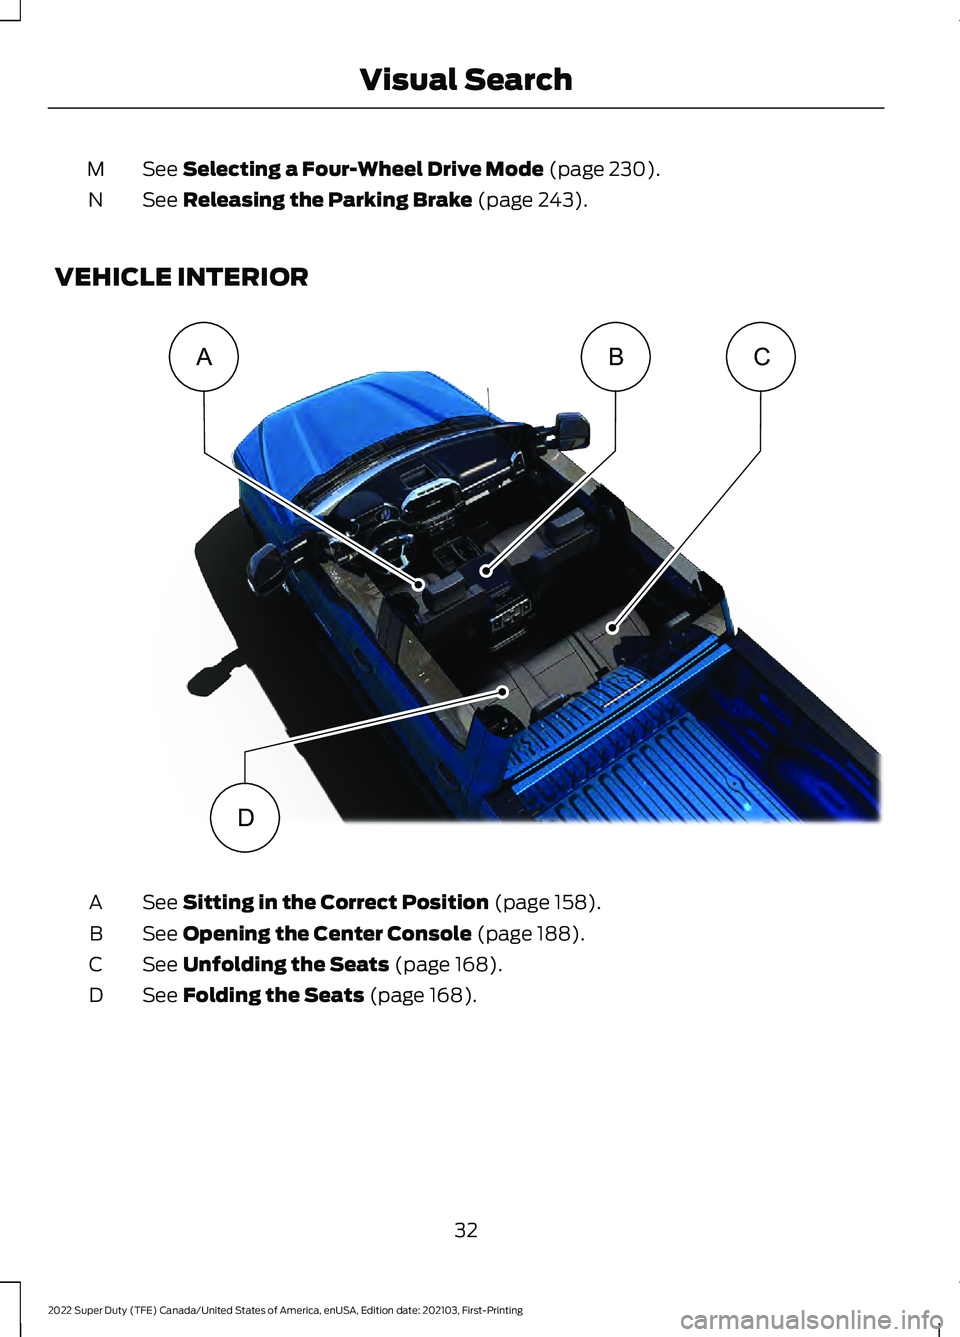 FORD F-450 2022 Owners Guide See Selecting a Four-Wheel Drive Mode (page 230).
M
See 
Releasing the Parking Brake (page 243).
N
VEHICLE INTERIOR See 
Sitting in the Correct Position (page 158).
A
See 
Opening the Center Console (